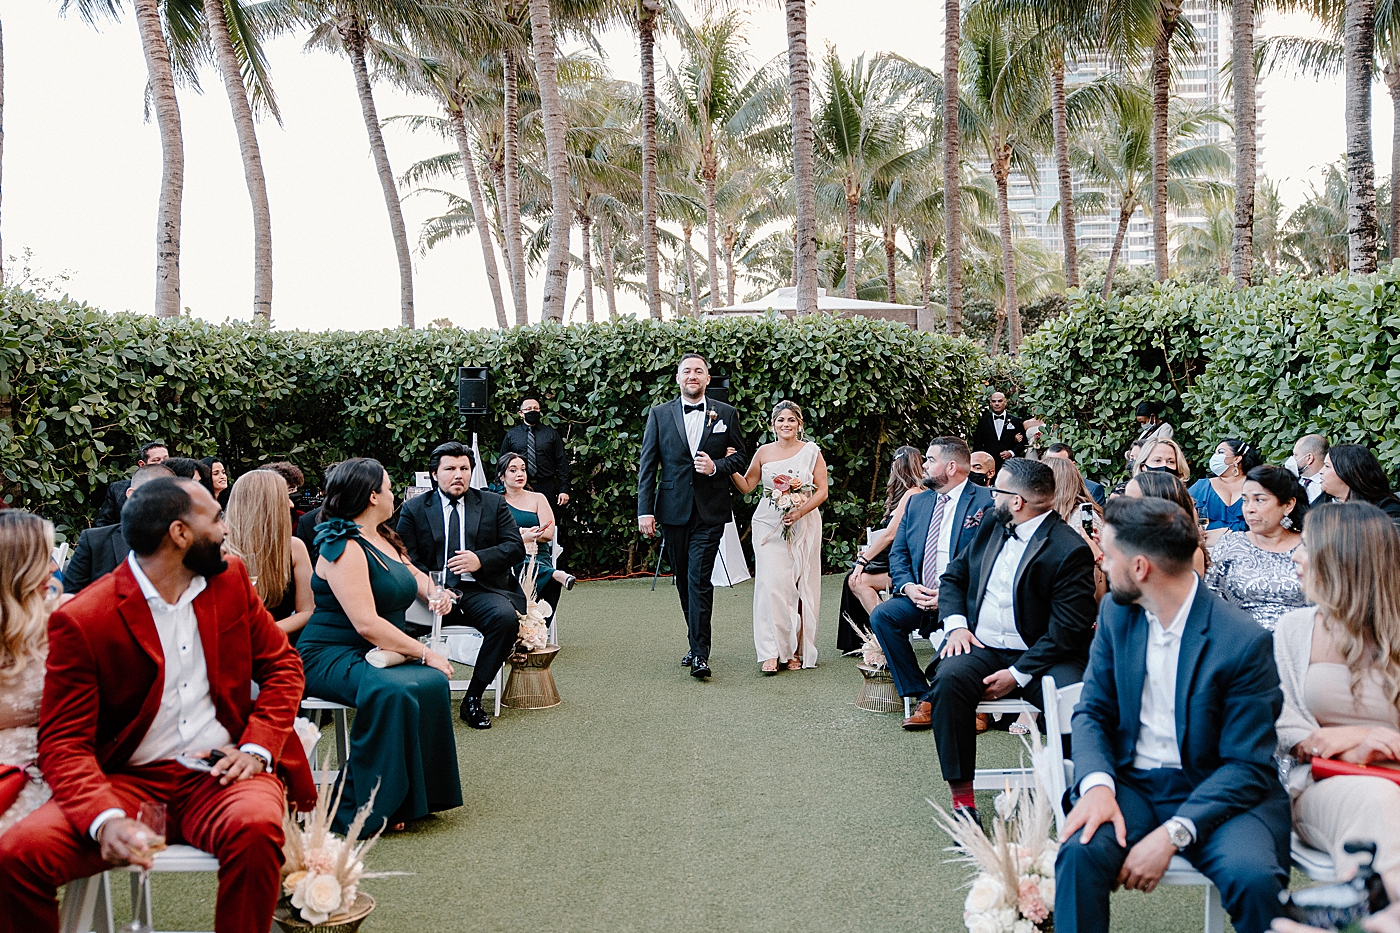 Groomsmen and Bridesmaid entering Ceremony with attendees watching Modern Elegant Wedding at The W South Beach captured by South Florida Wedding Photographer Erika Tuesta Photography